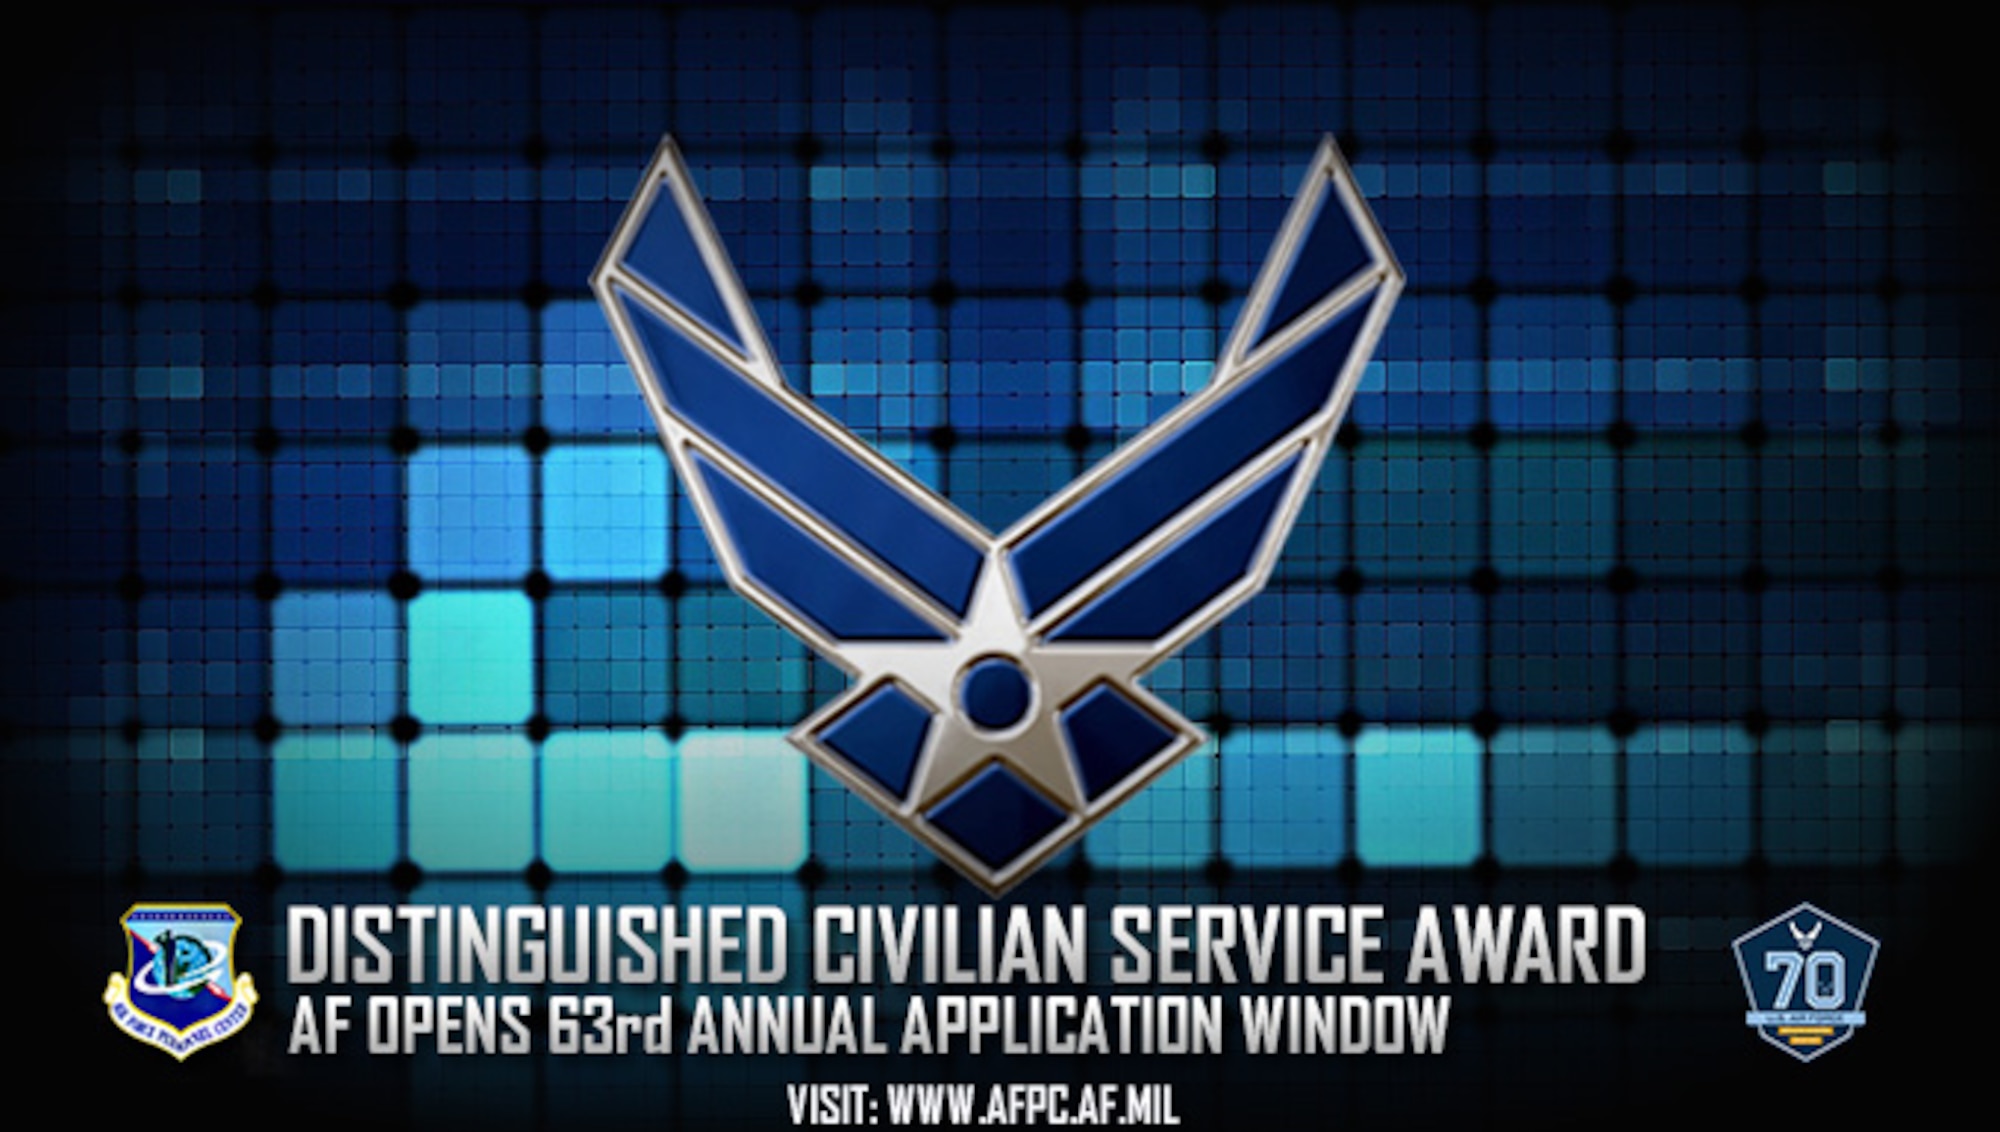 Distinguished Civilian Service Award; AF opens 63rd annual application window